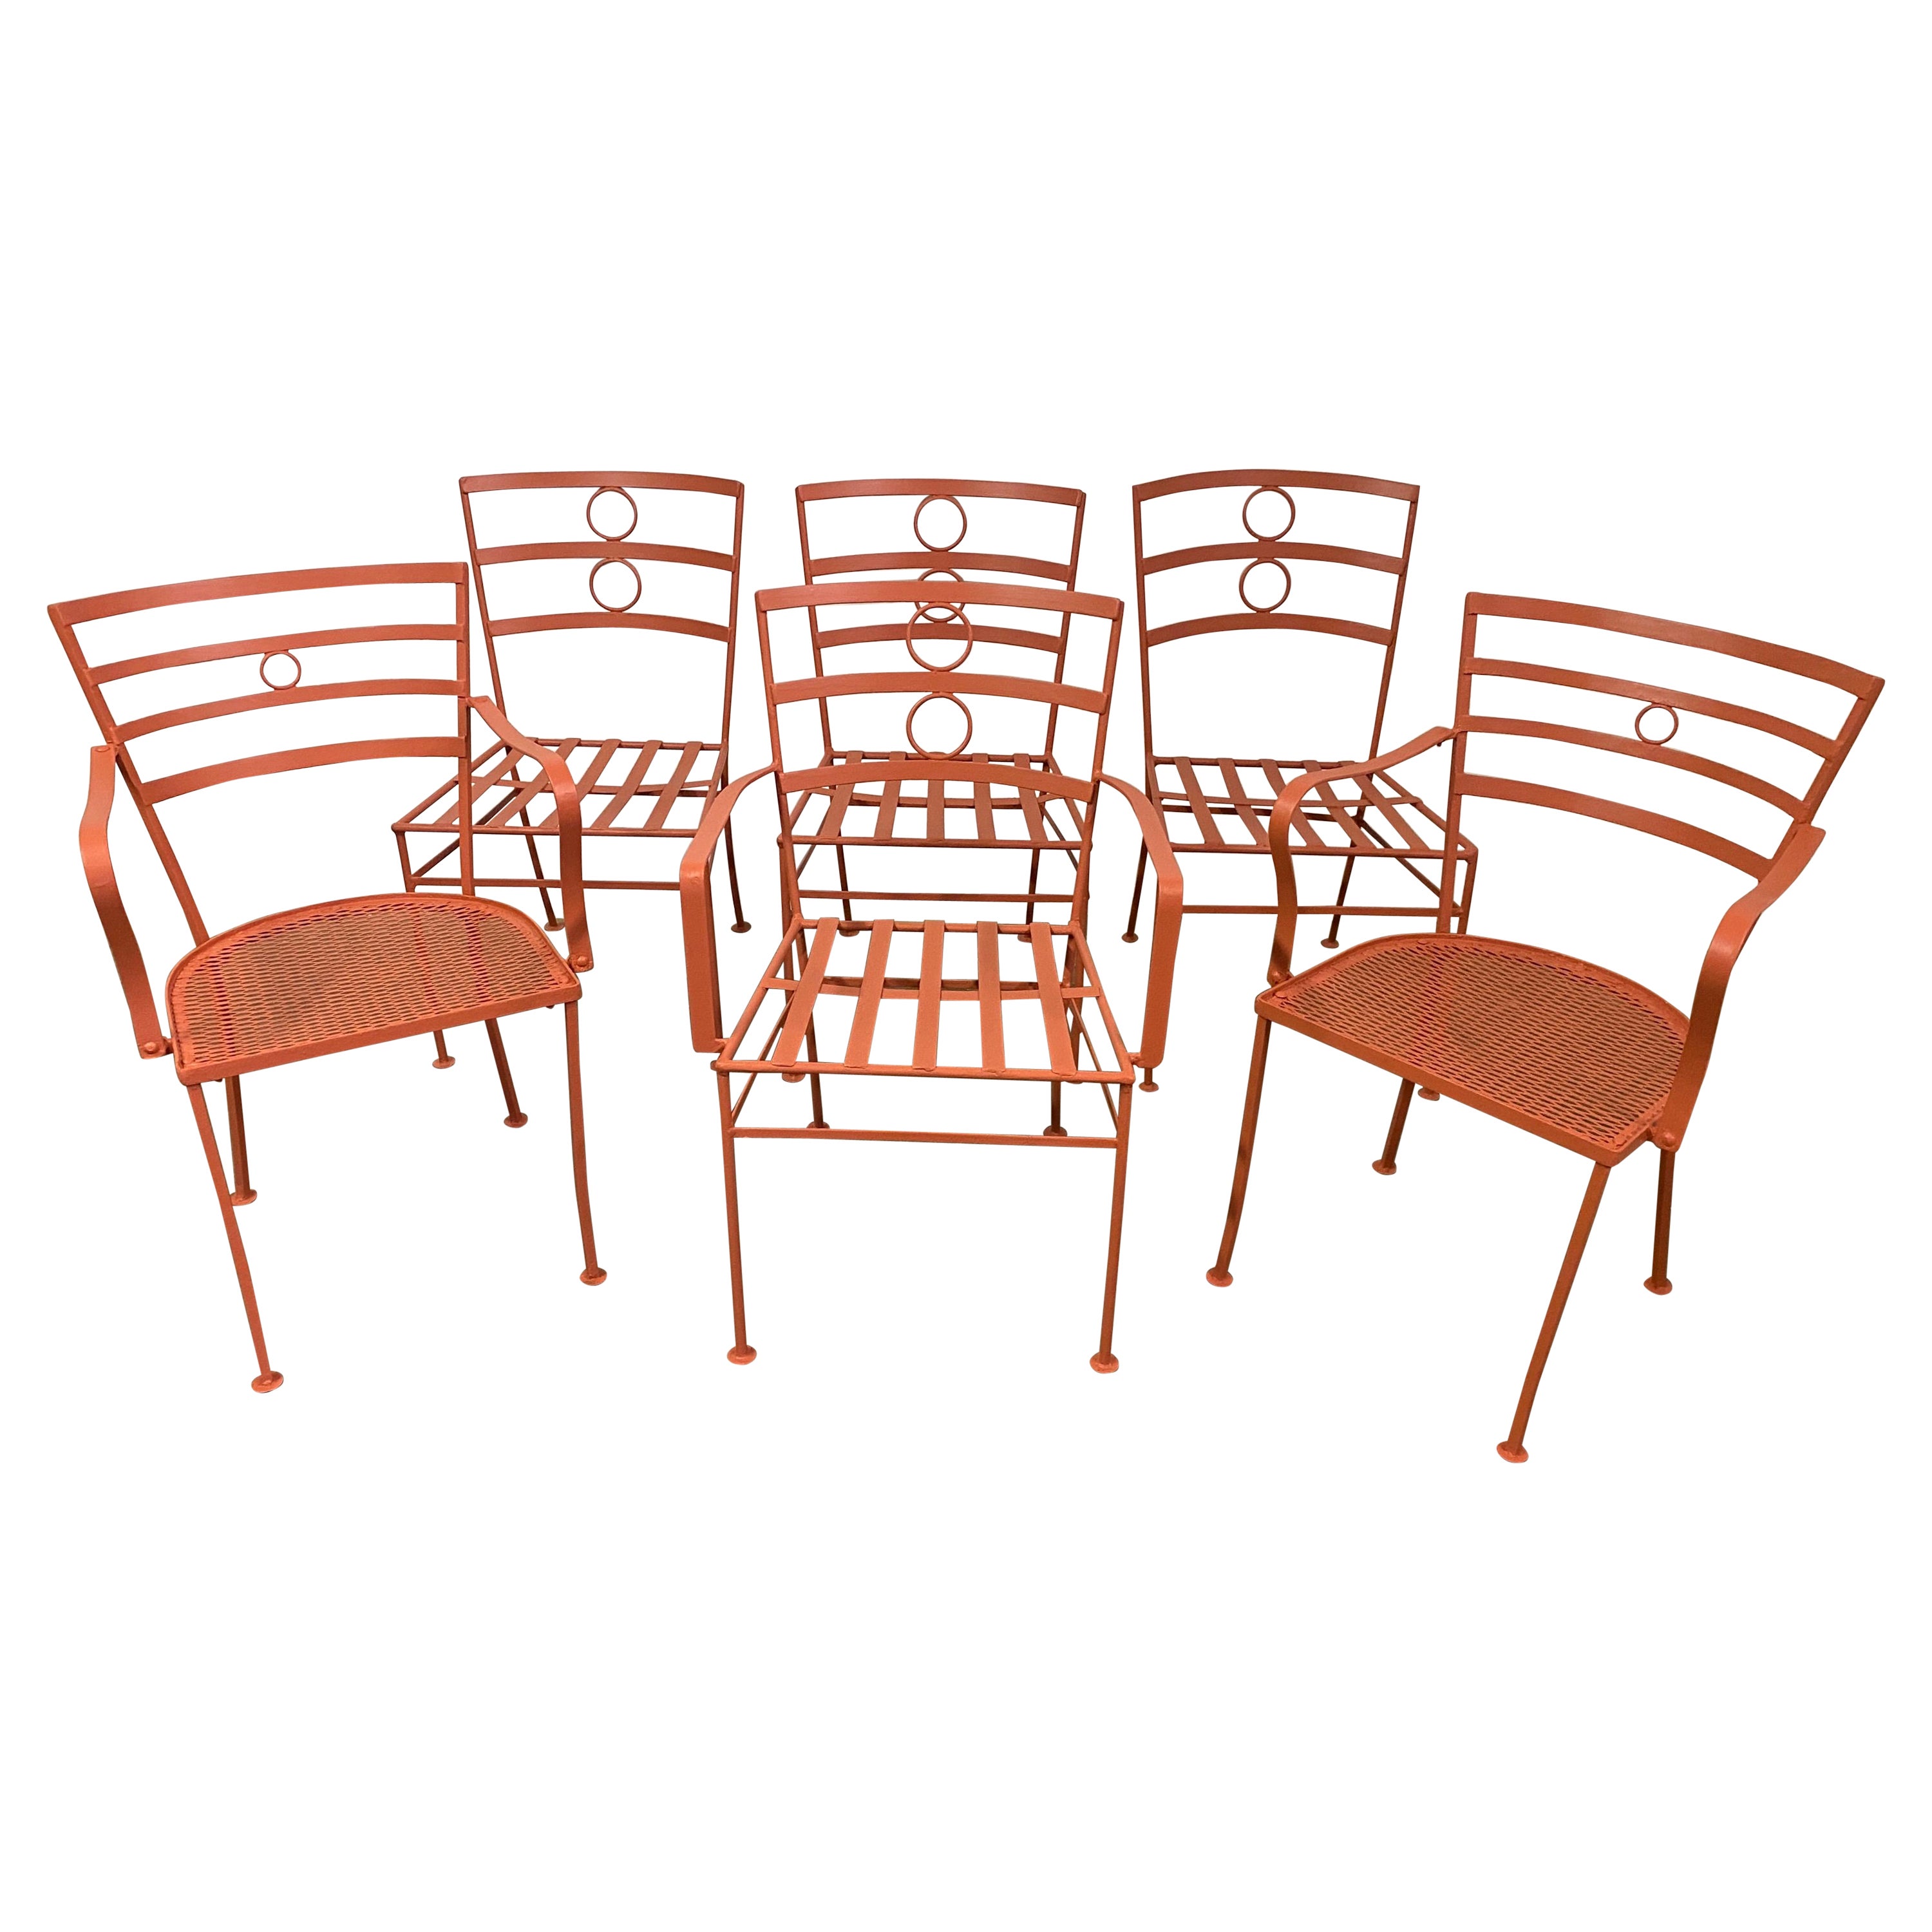 Set of 6 "Almost" Matching Metal Garden Dining Chairs